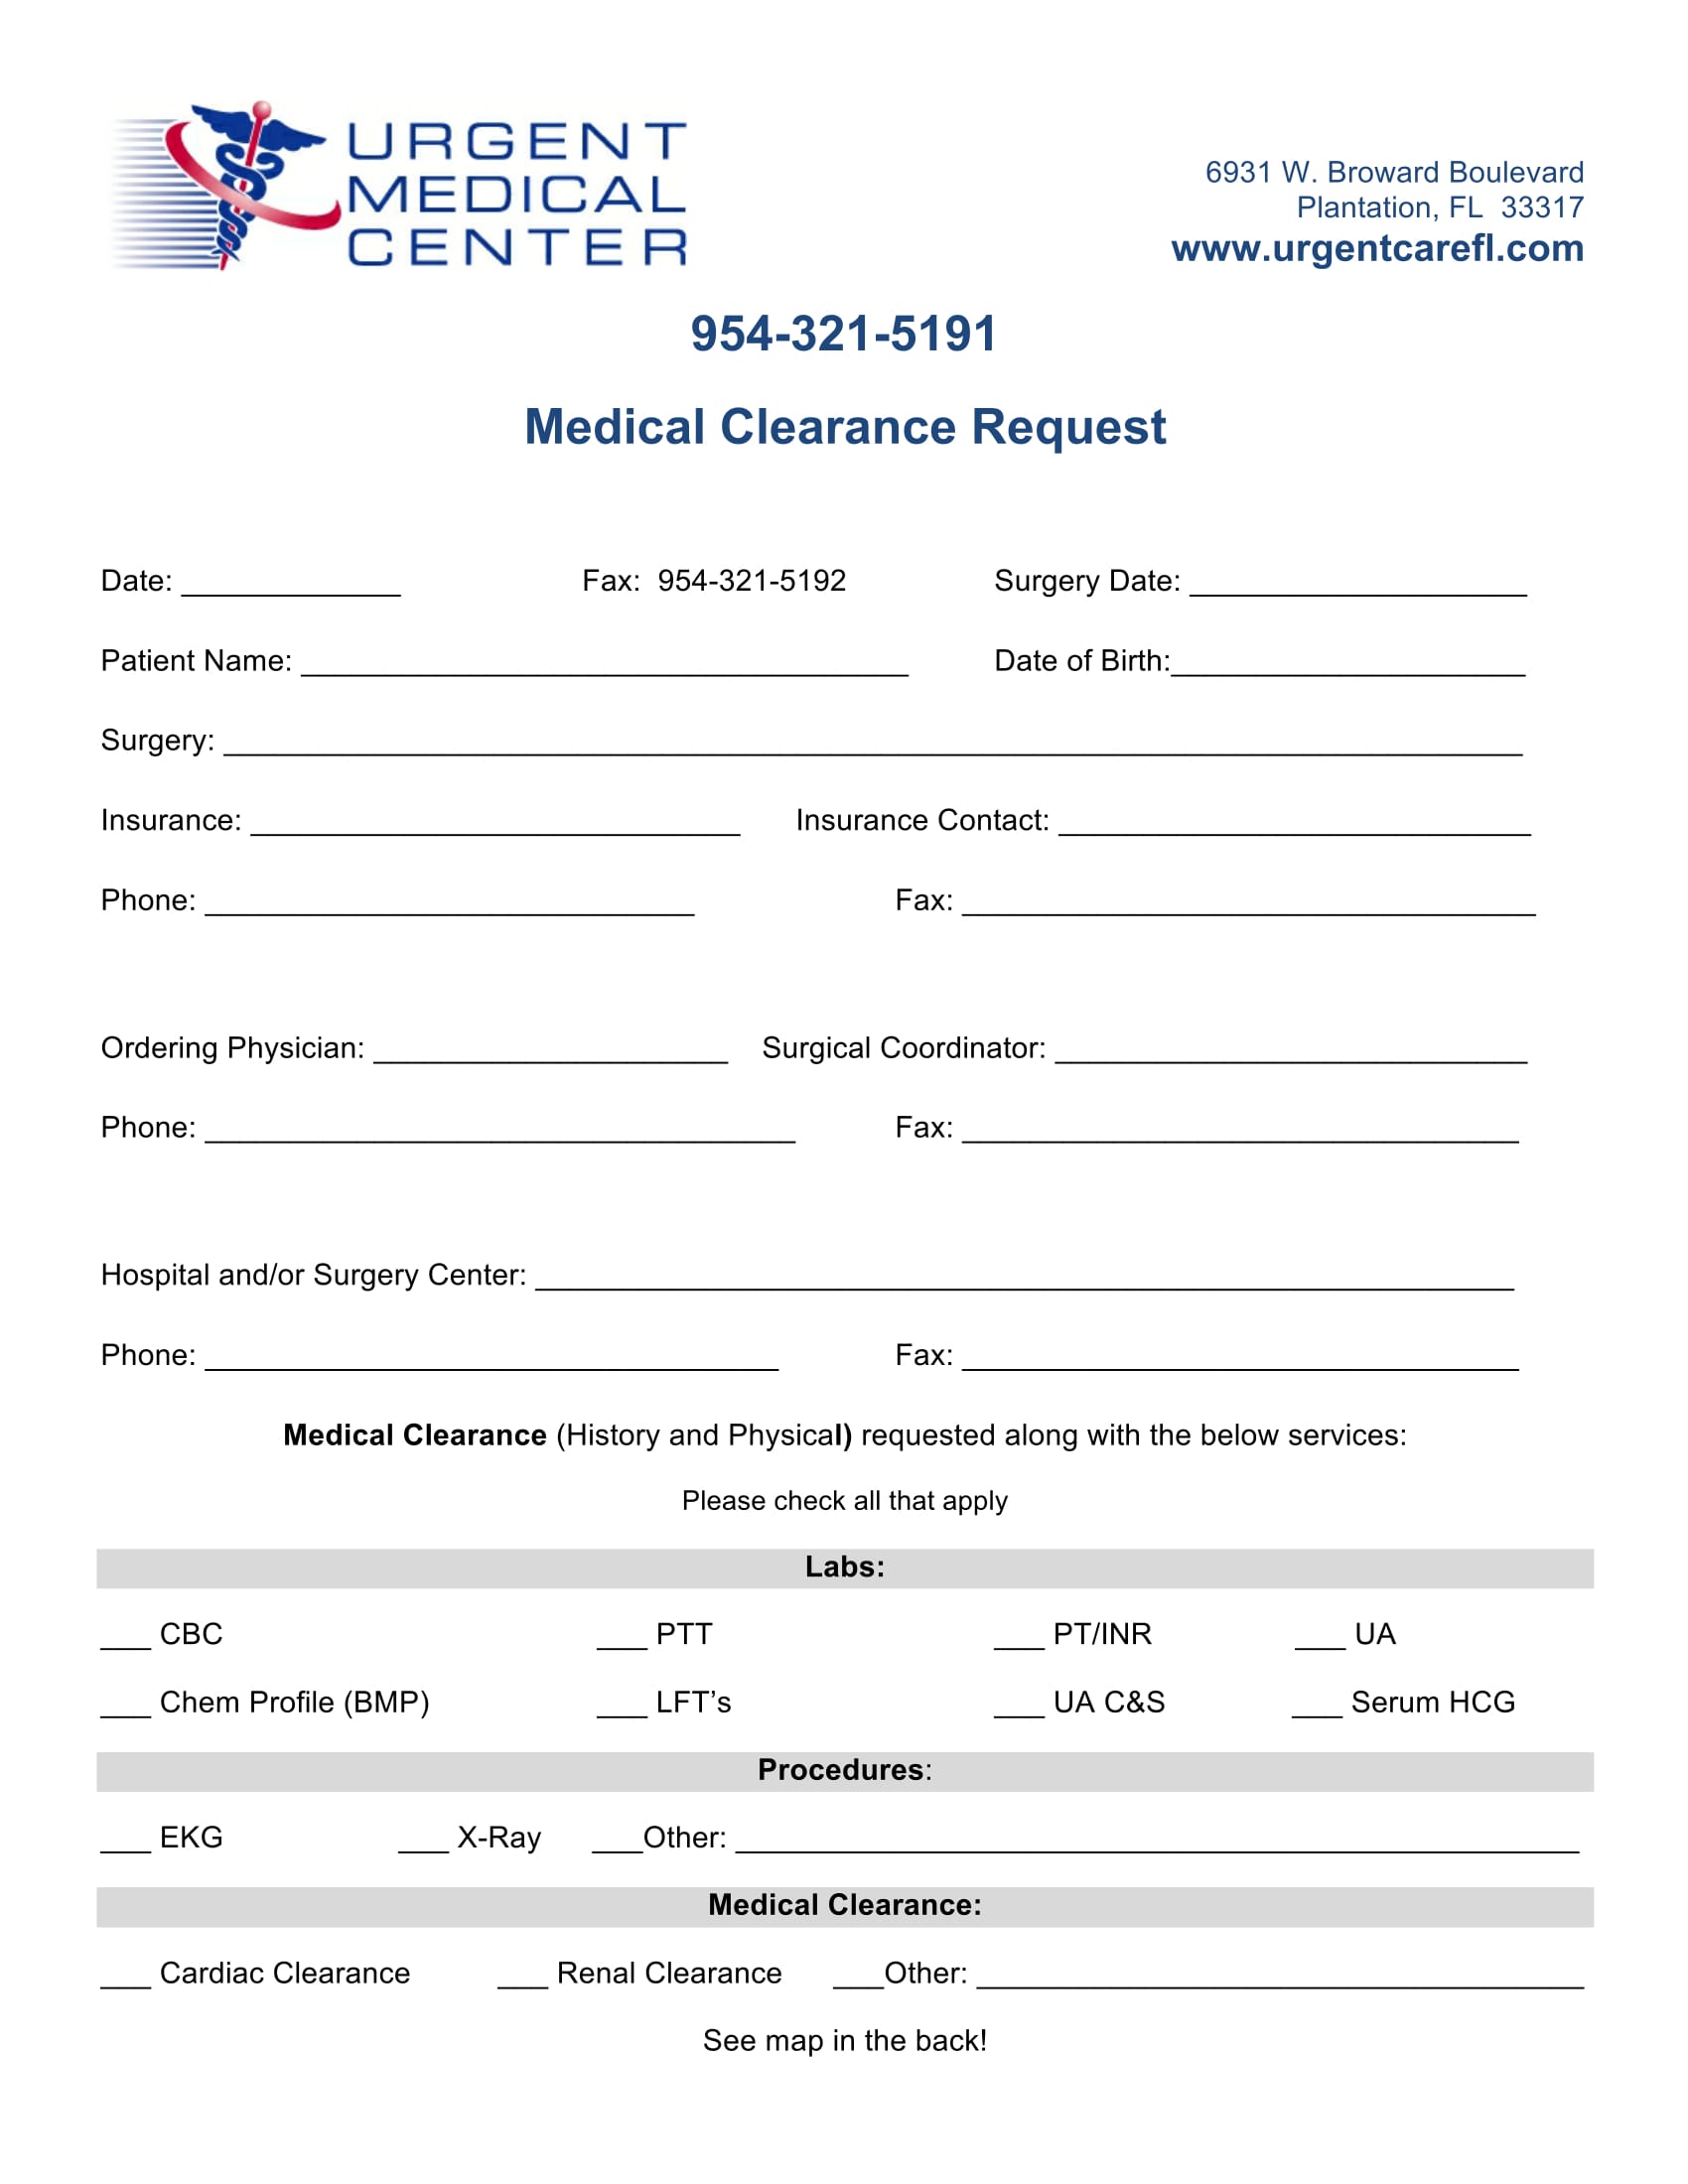 medical clearance request form 1